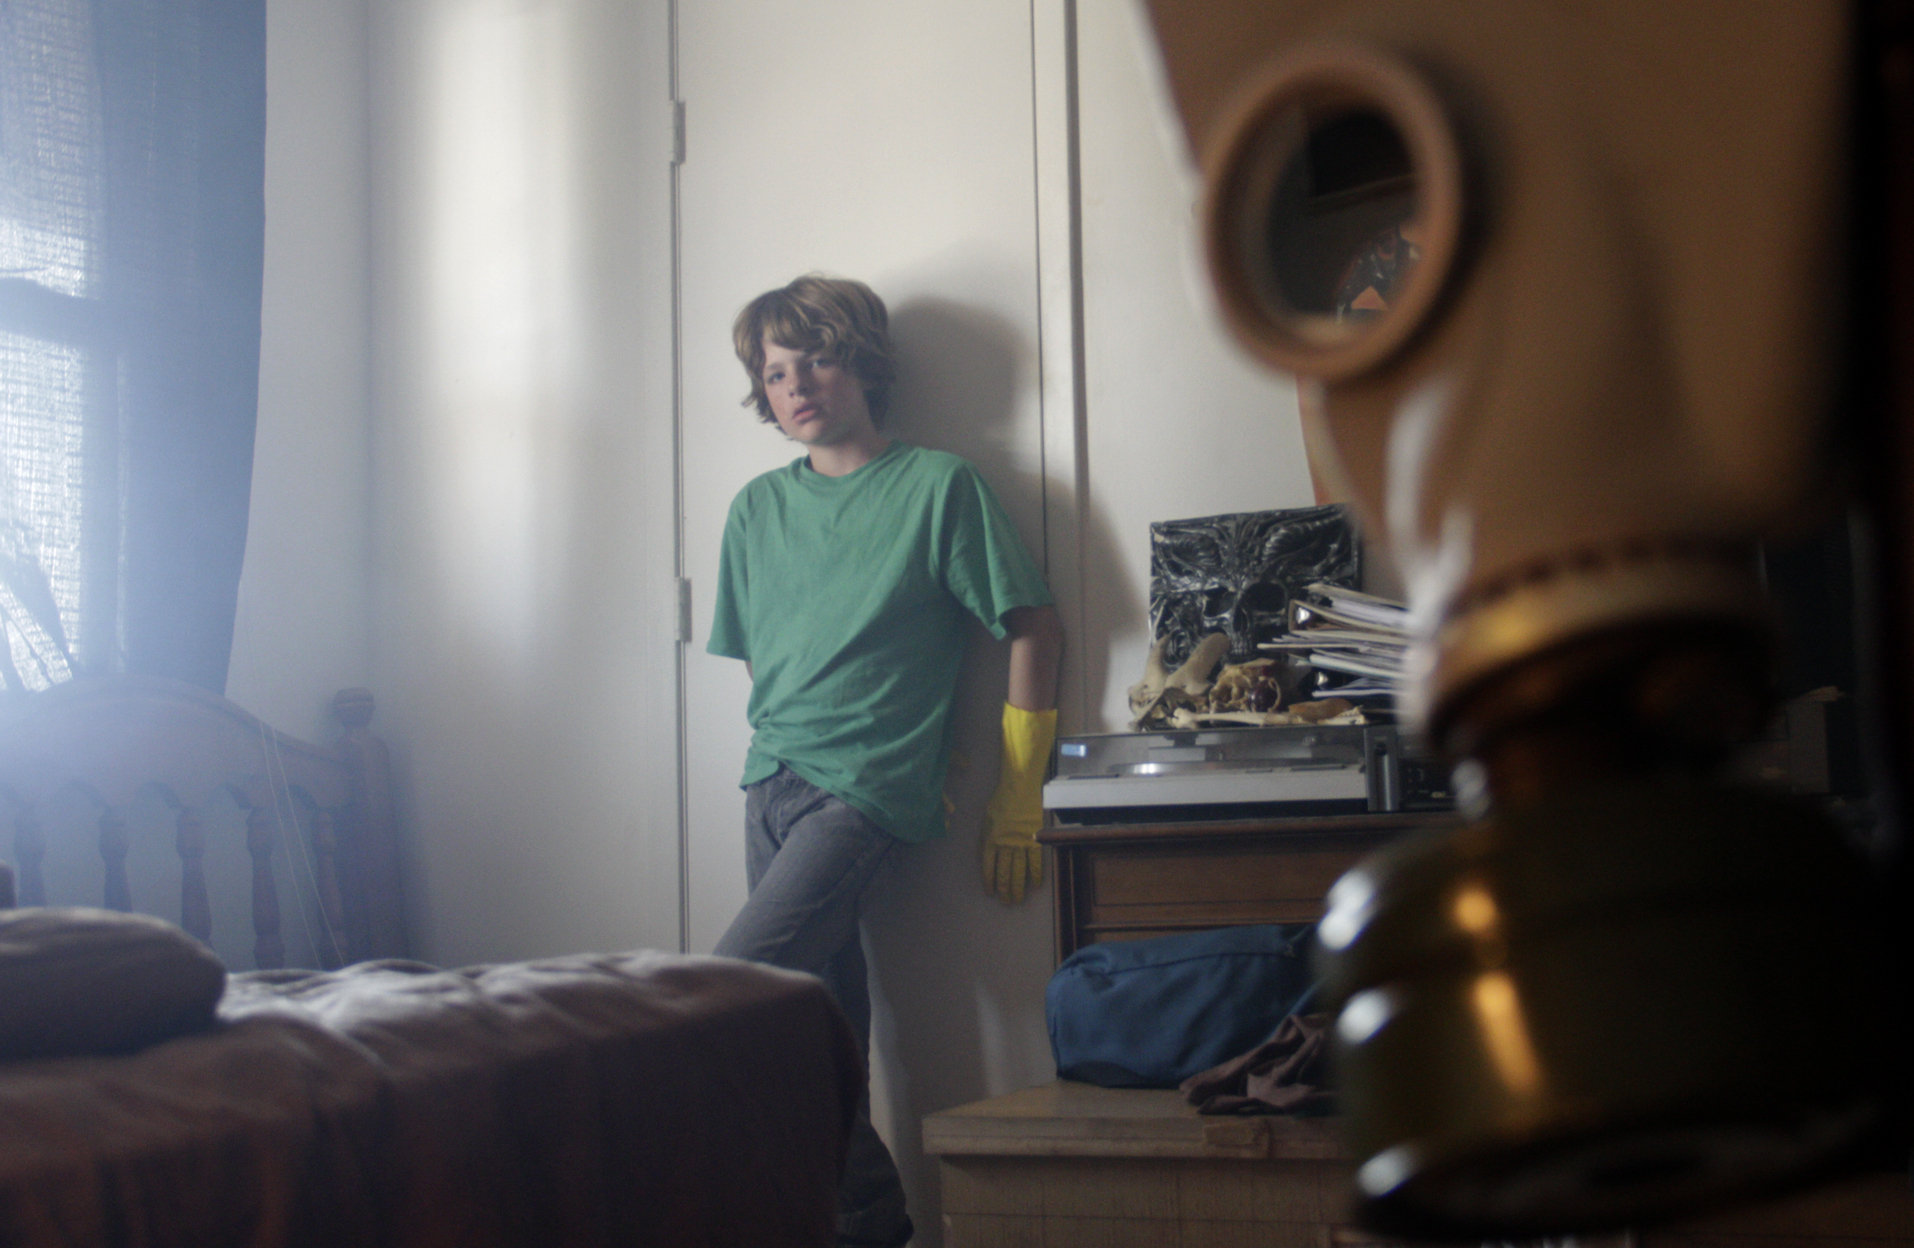 Gavin Brown stars as the bullied Marty in the coming-of-age horror film 